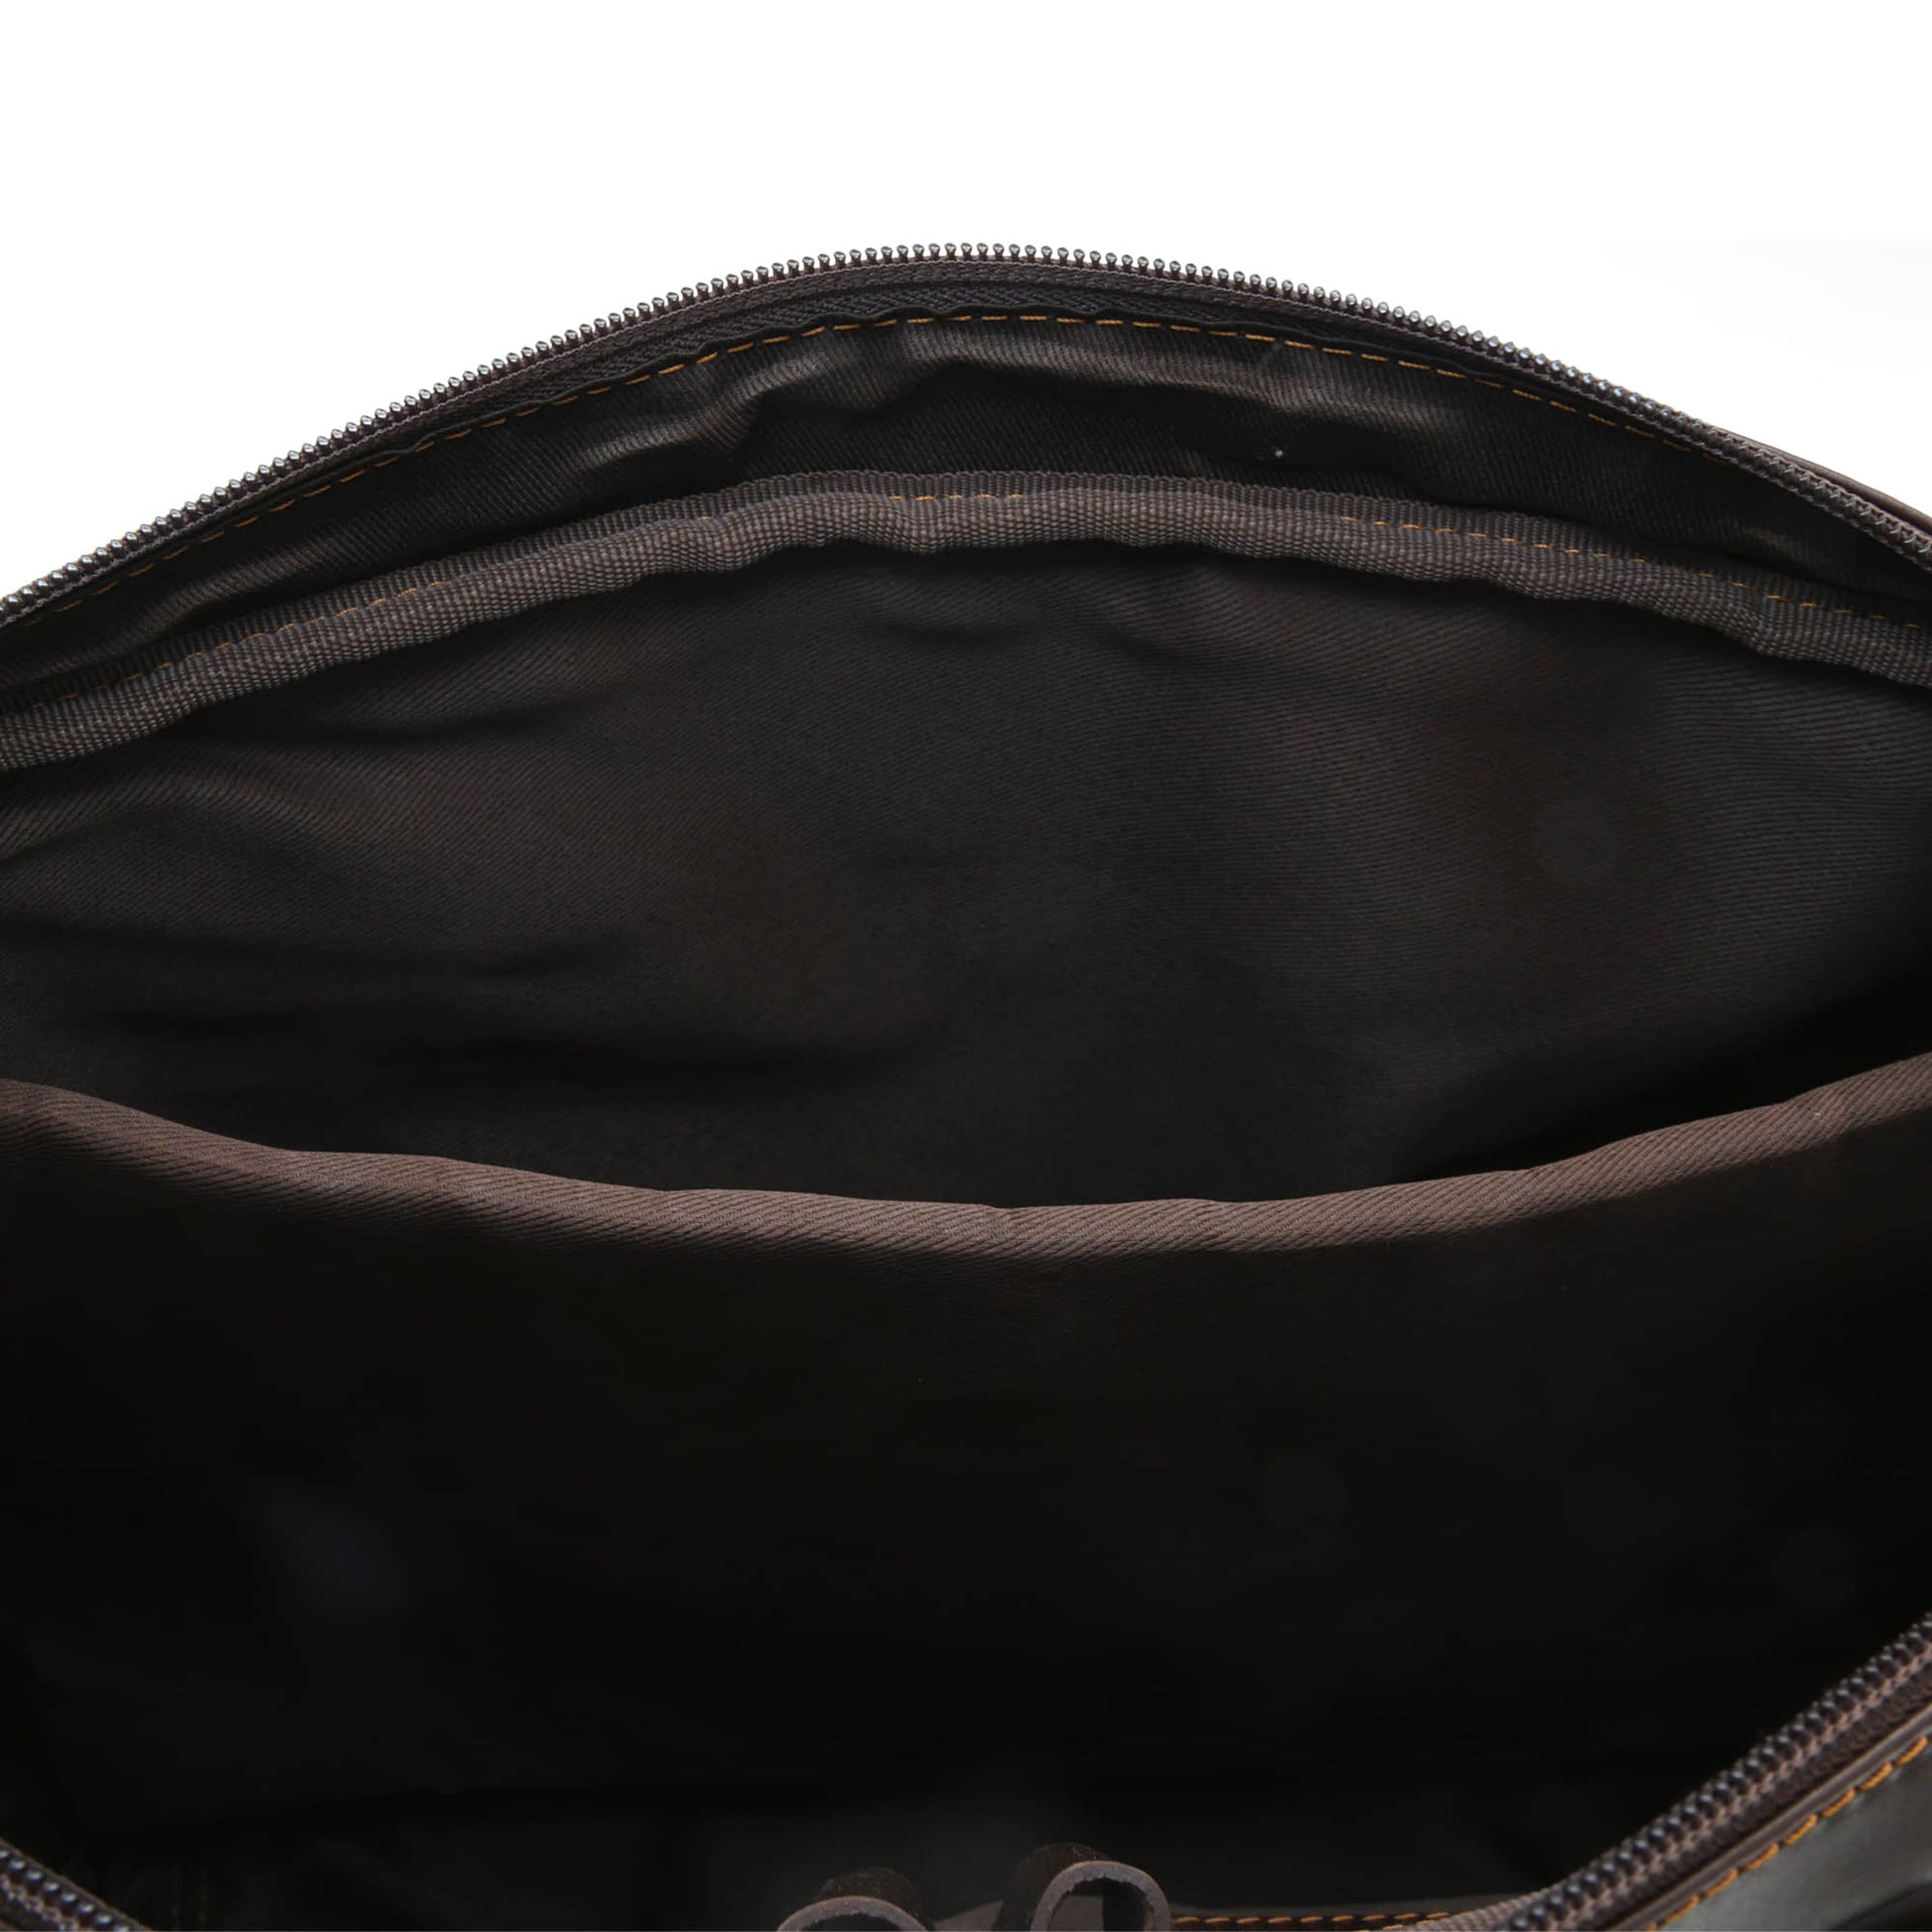 Style n Craft 392009 Men's Portfolio Briefcase Bag in Full Grain Dark Brown Leather - Internal View showing the Padded Divider with the Back Compartment for Storing a 15 inch Laptop